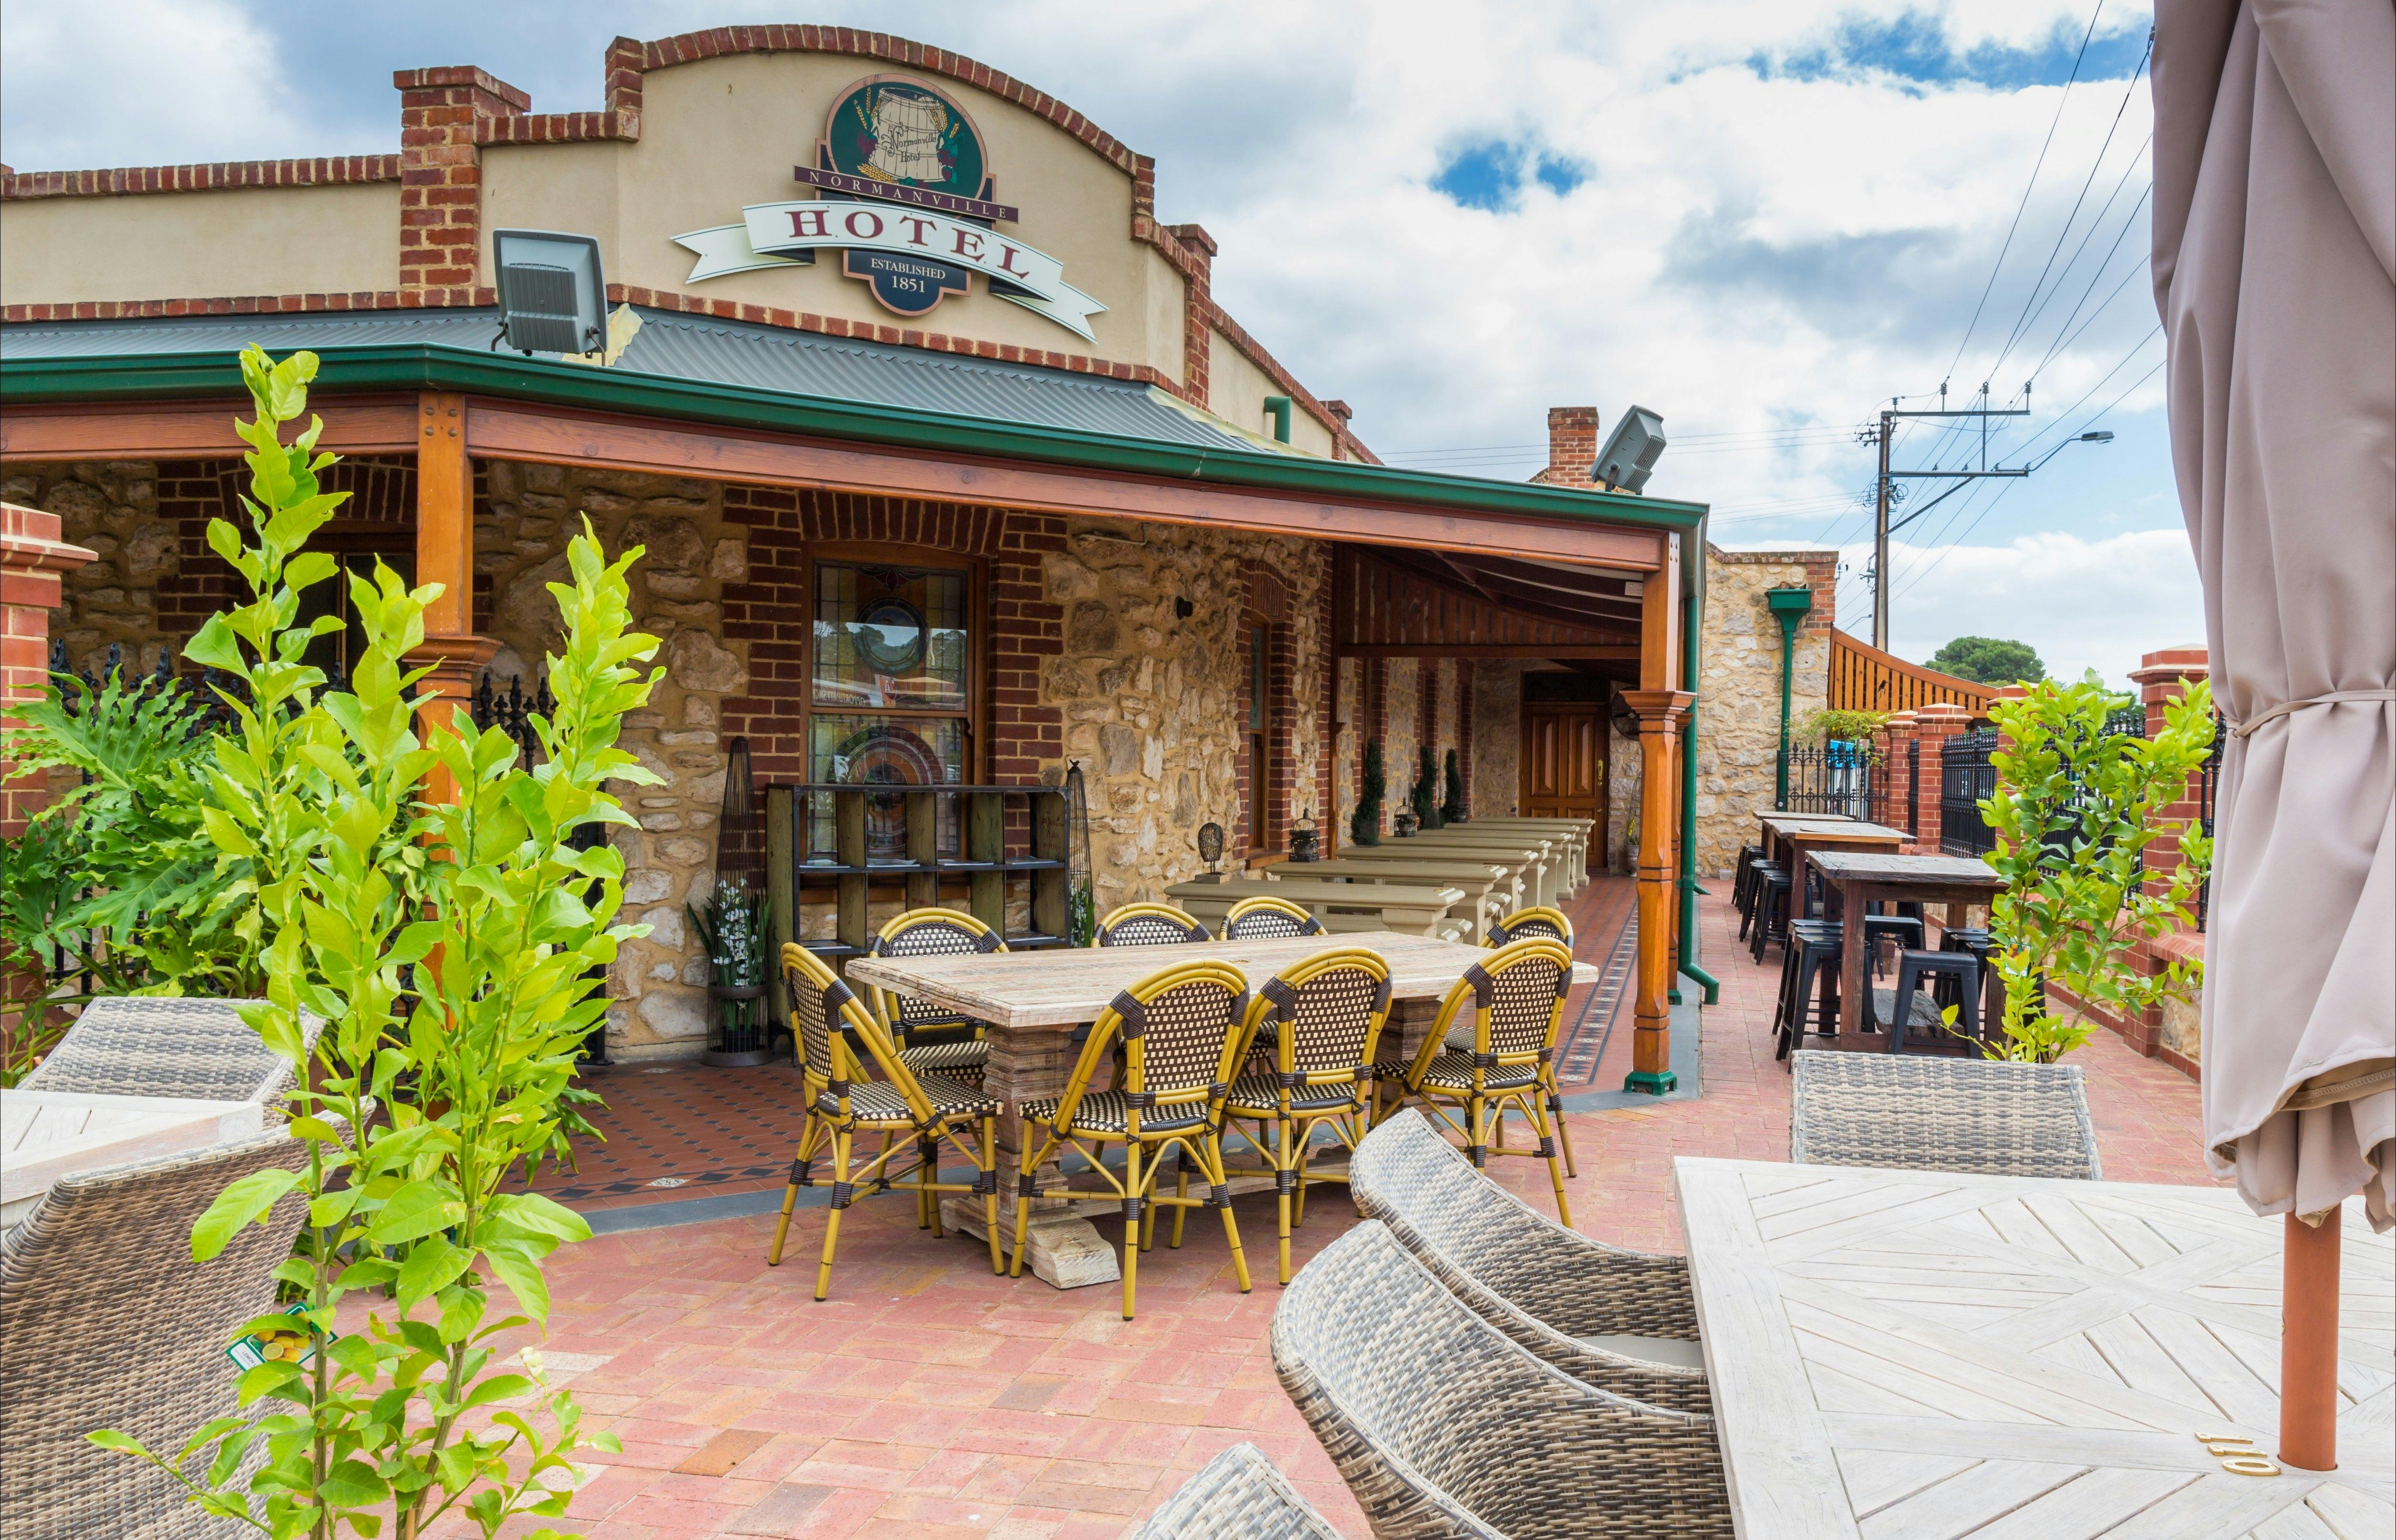 Seating in Beer Garden, Normanville Hotel with hotel building in background. Photo taken in 2014.